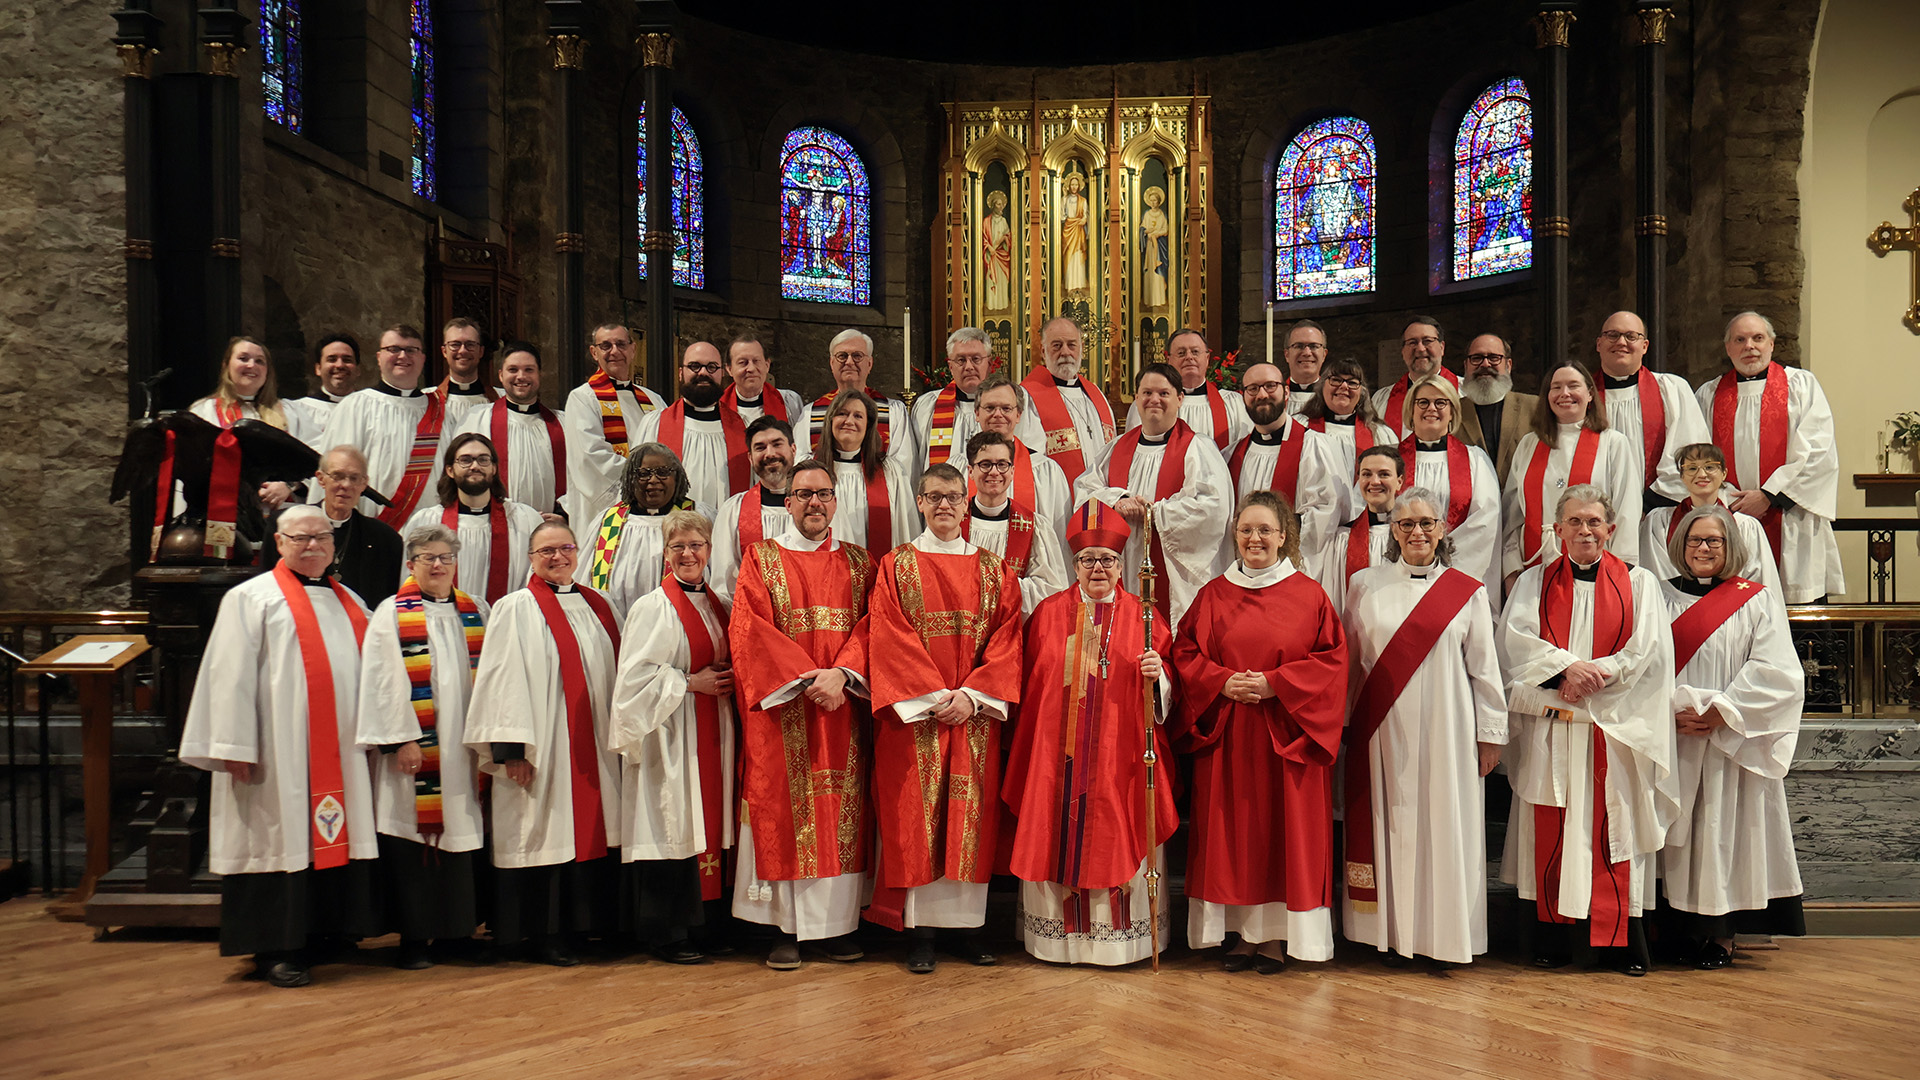 The Diocese of West Missouri Celebrates the Diaconal Ordination of Mark Andrew Bowers, Silas Engstrom, and Katherine Louise Mansfield